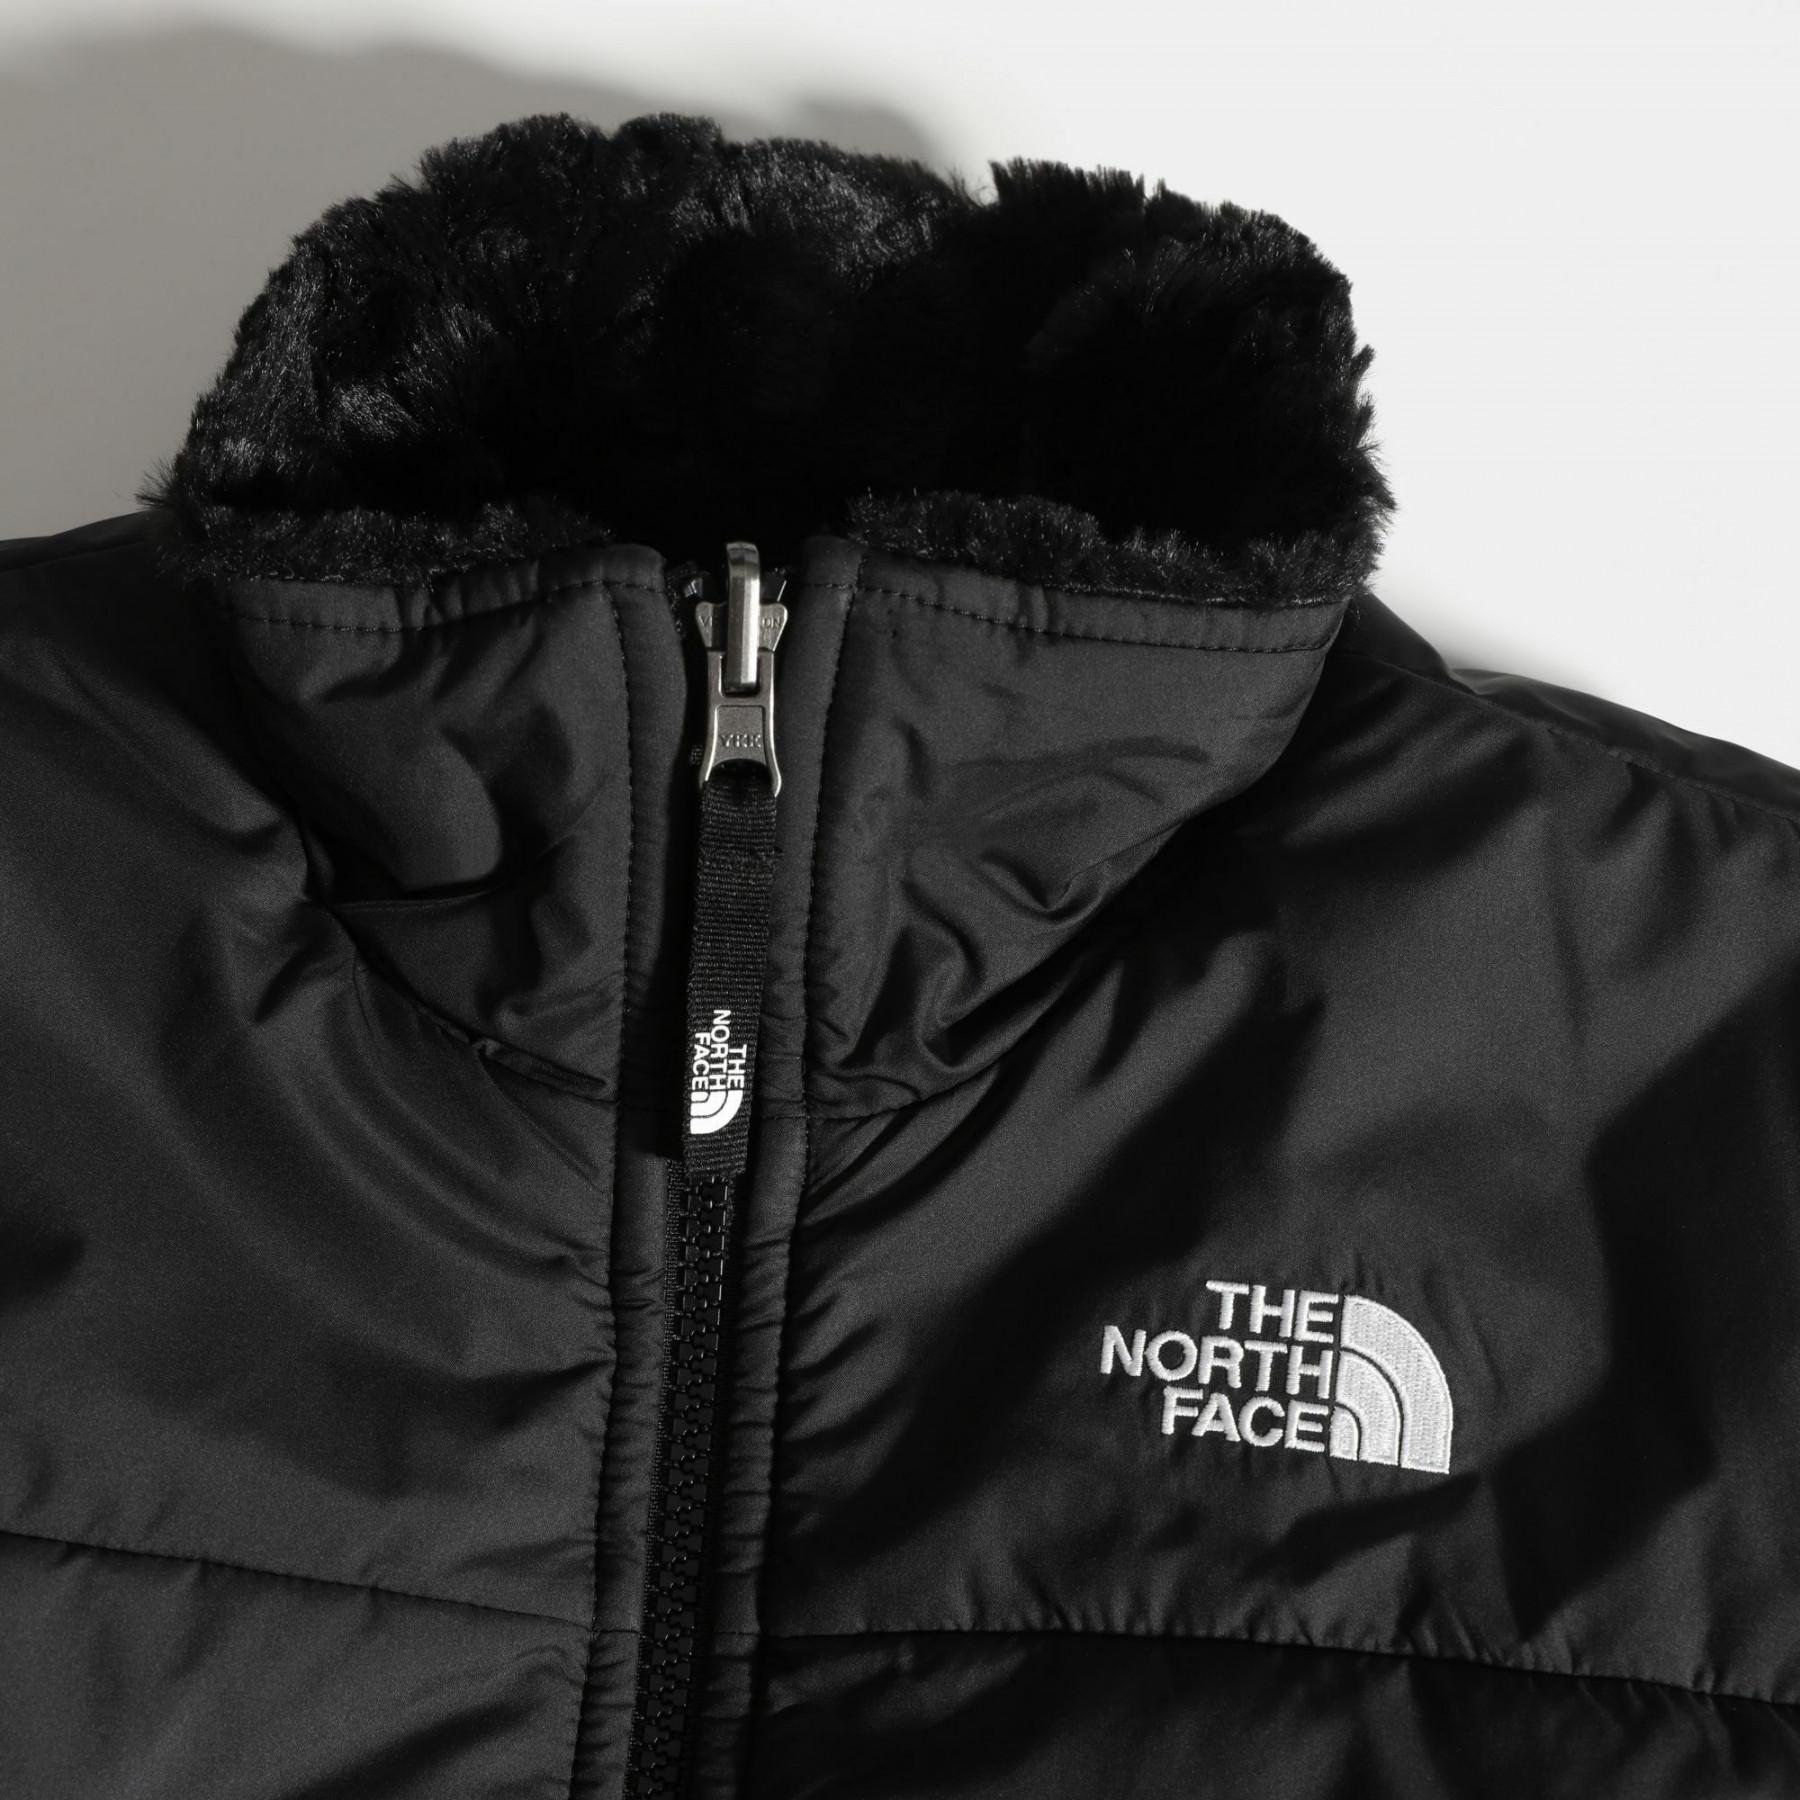 Children's jacket The North Face Reversible Mossbud